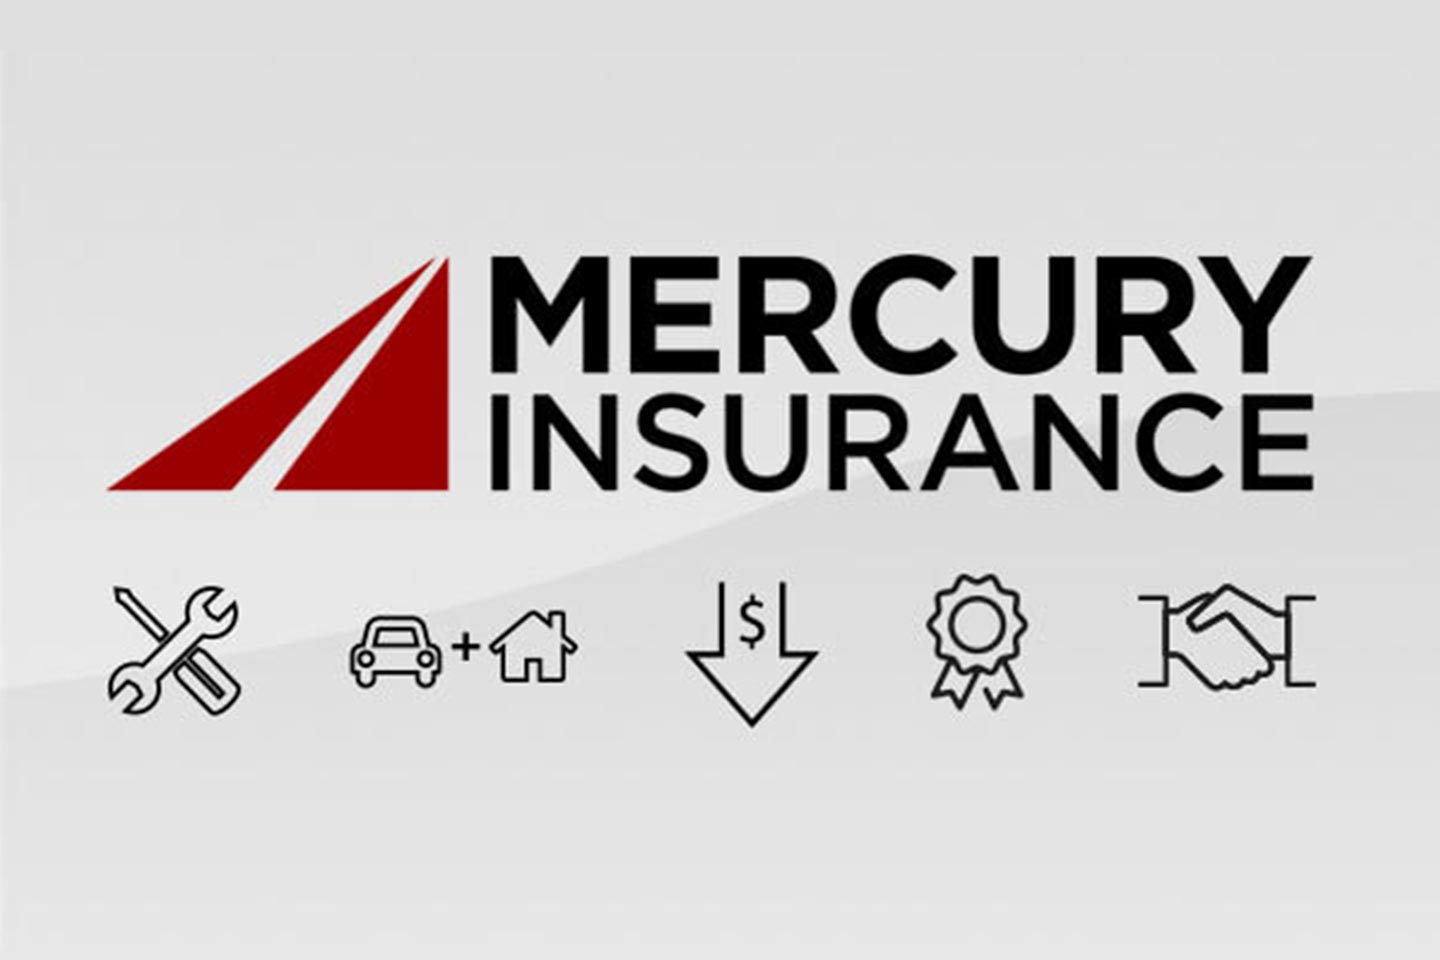 Mercury Insurance logo and 5 icons for reasons to switch